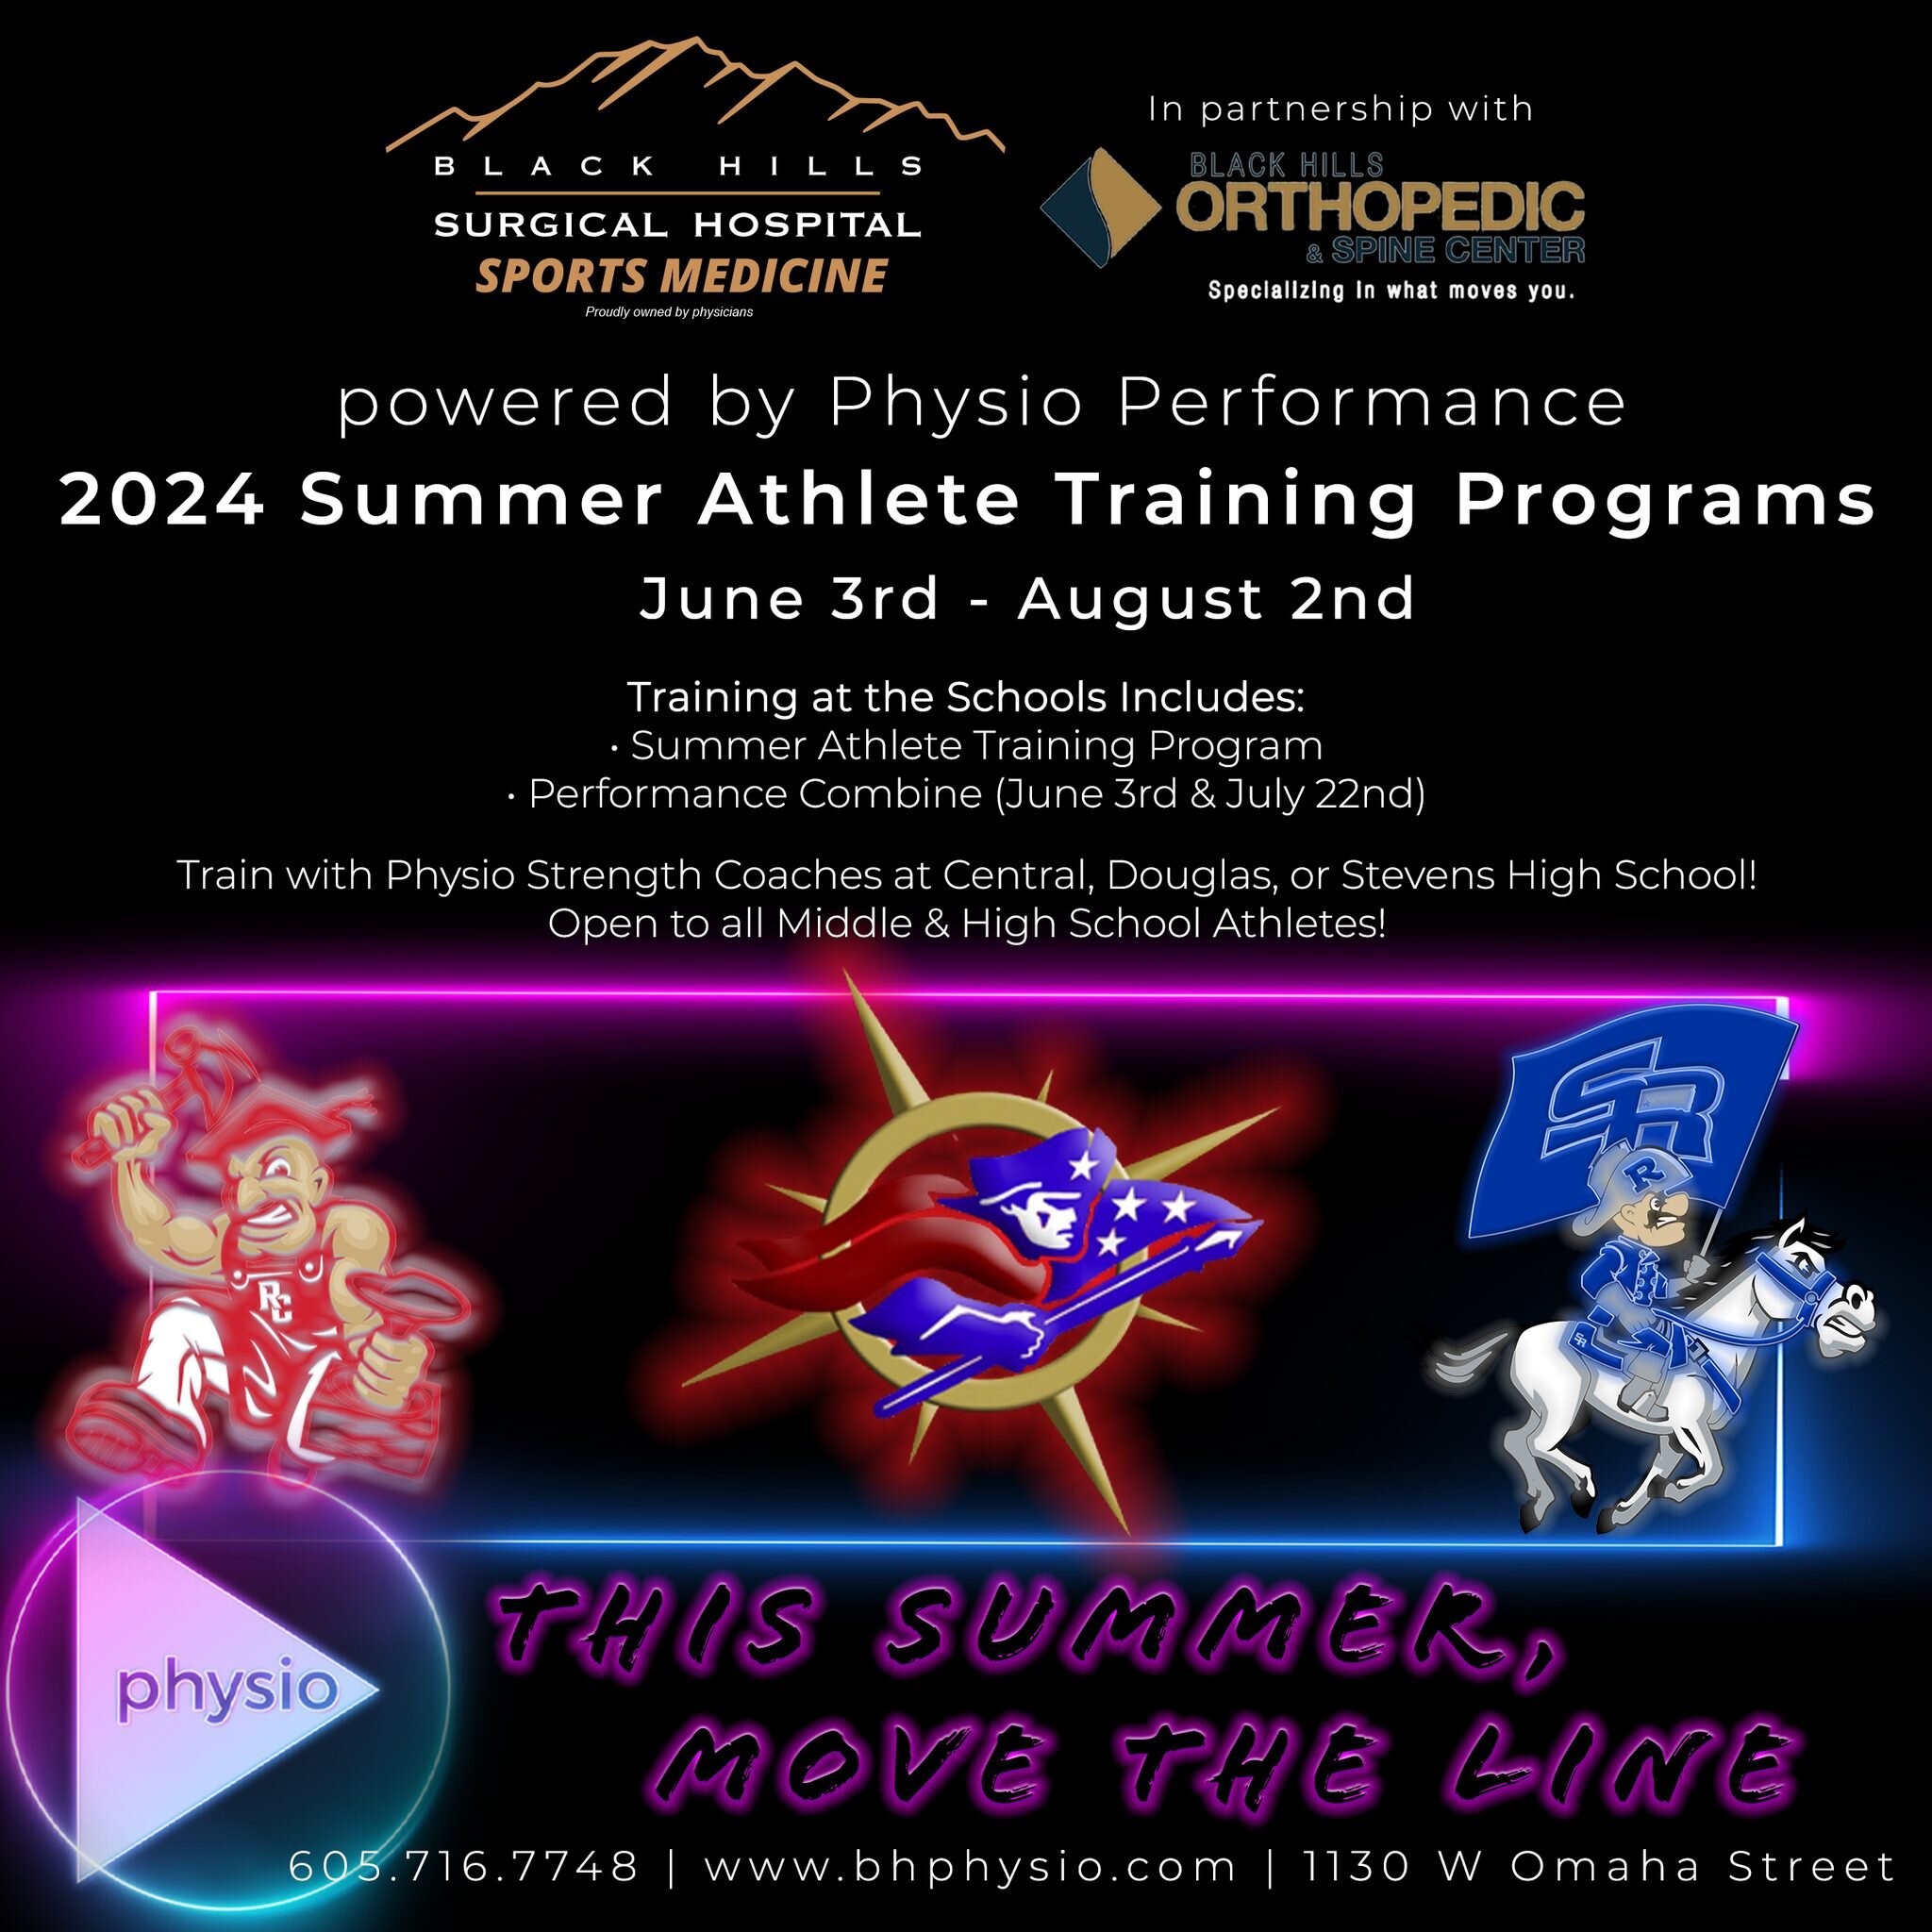 Summer Athlete Training is now live. With our expert strength and conditioning coaches, you can take your game to the next level. From budding young talents to college-level athletes, we've got the perfect program for you. Don't settle for ordinary &